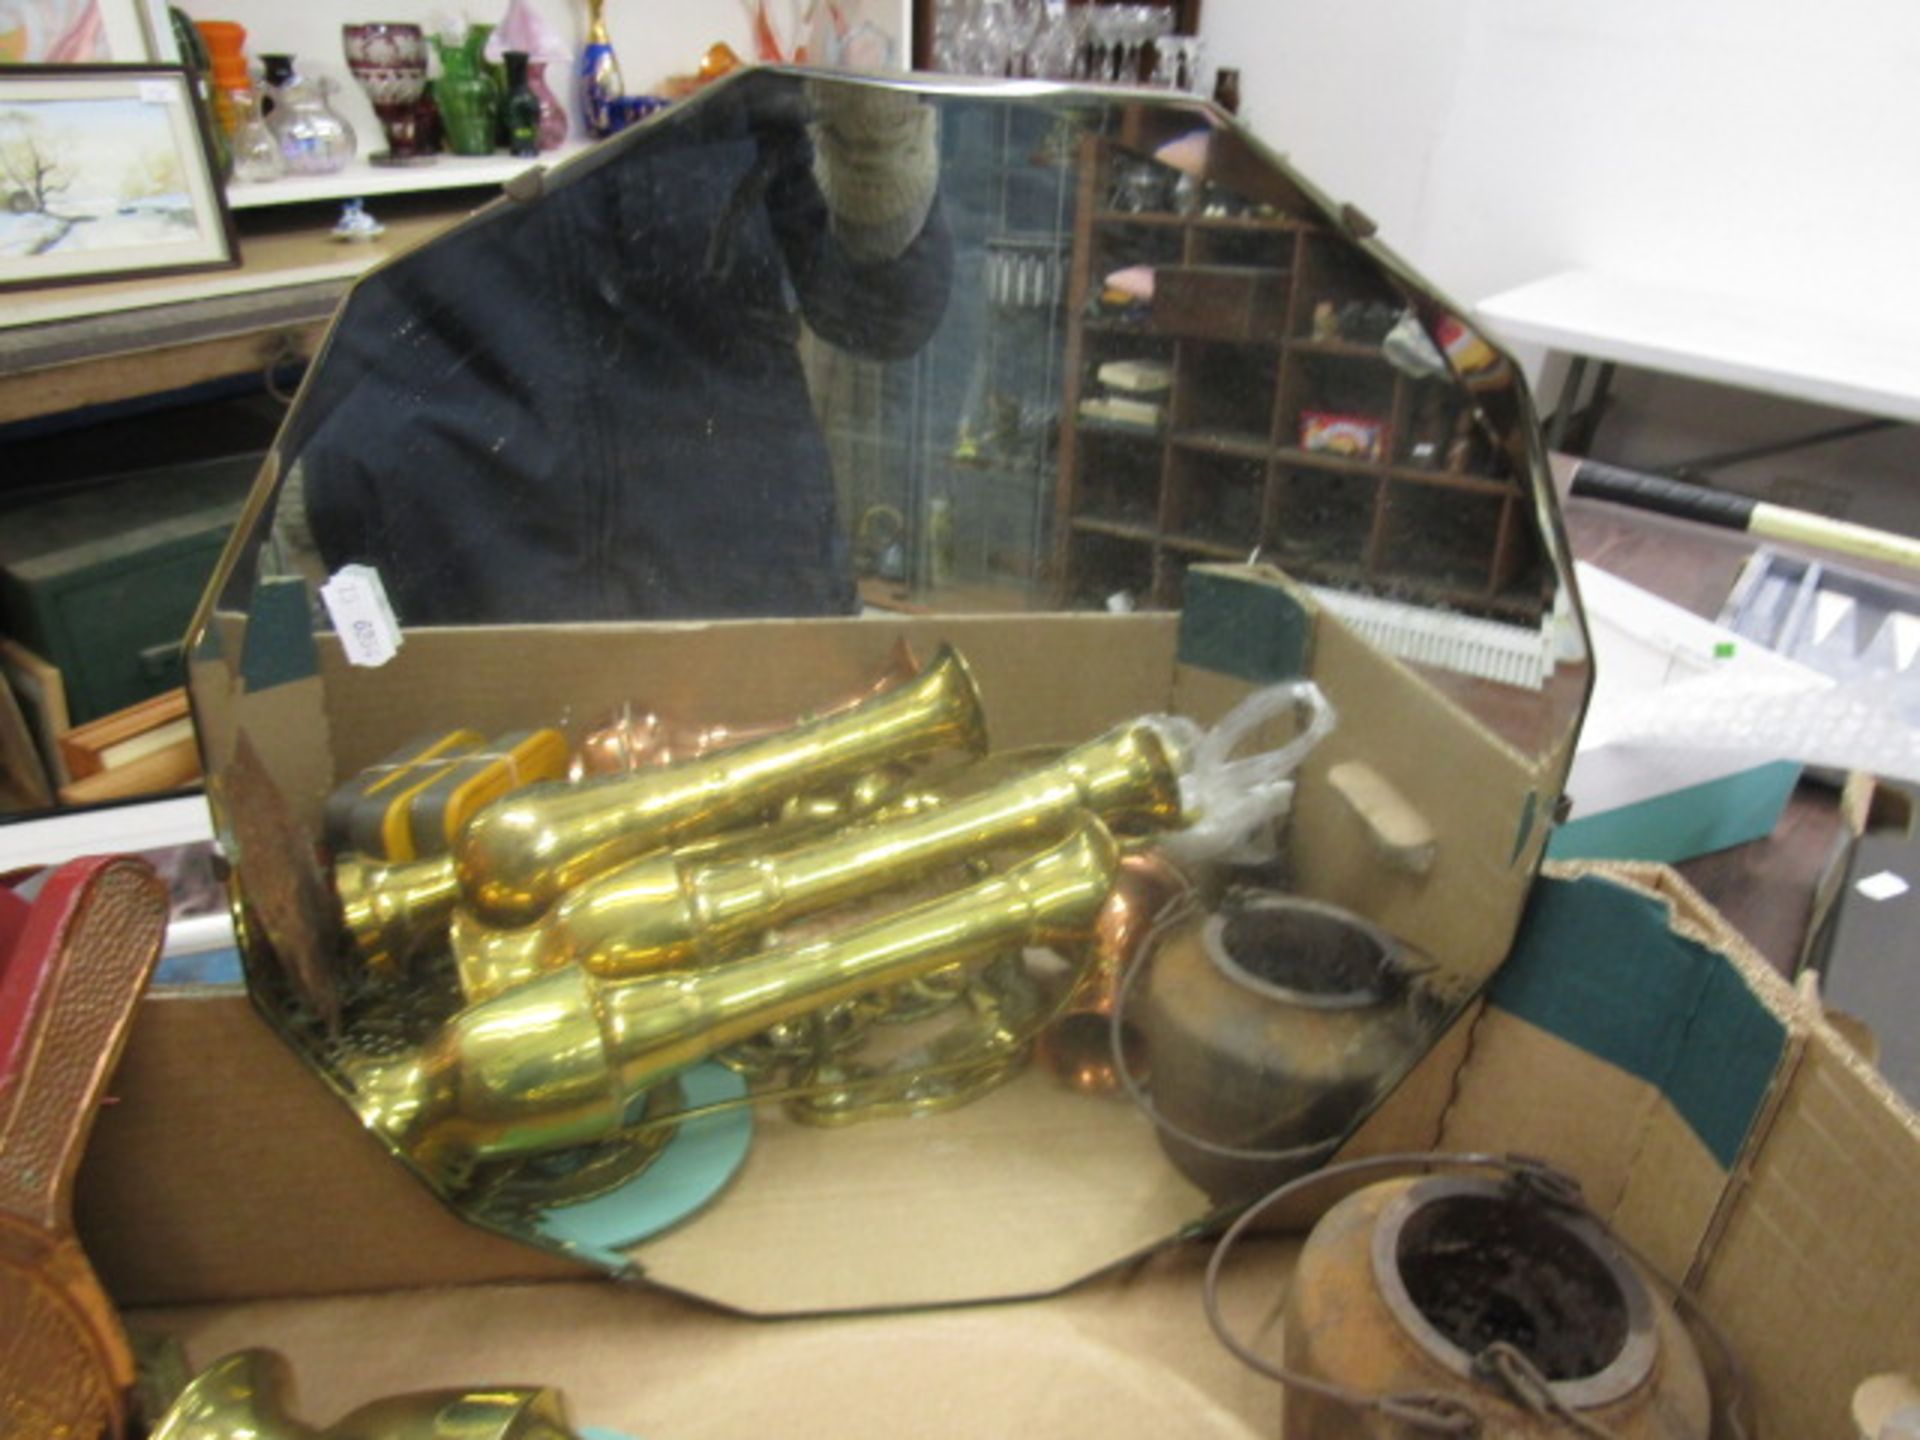 Metal wares inc copper/brass jugs, brass door furniture and a vintage glue pot, mirror and tobacco - Image 9 of 9